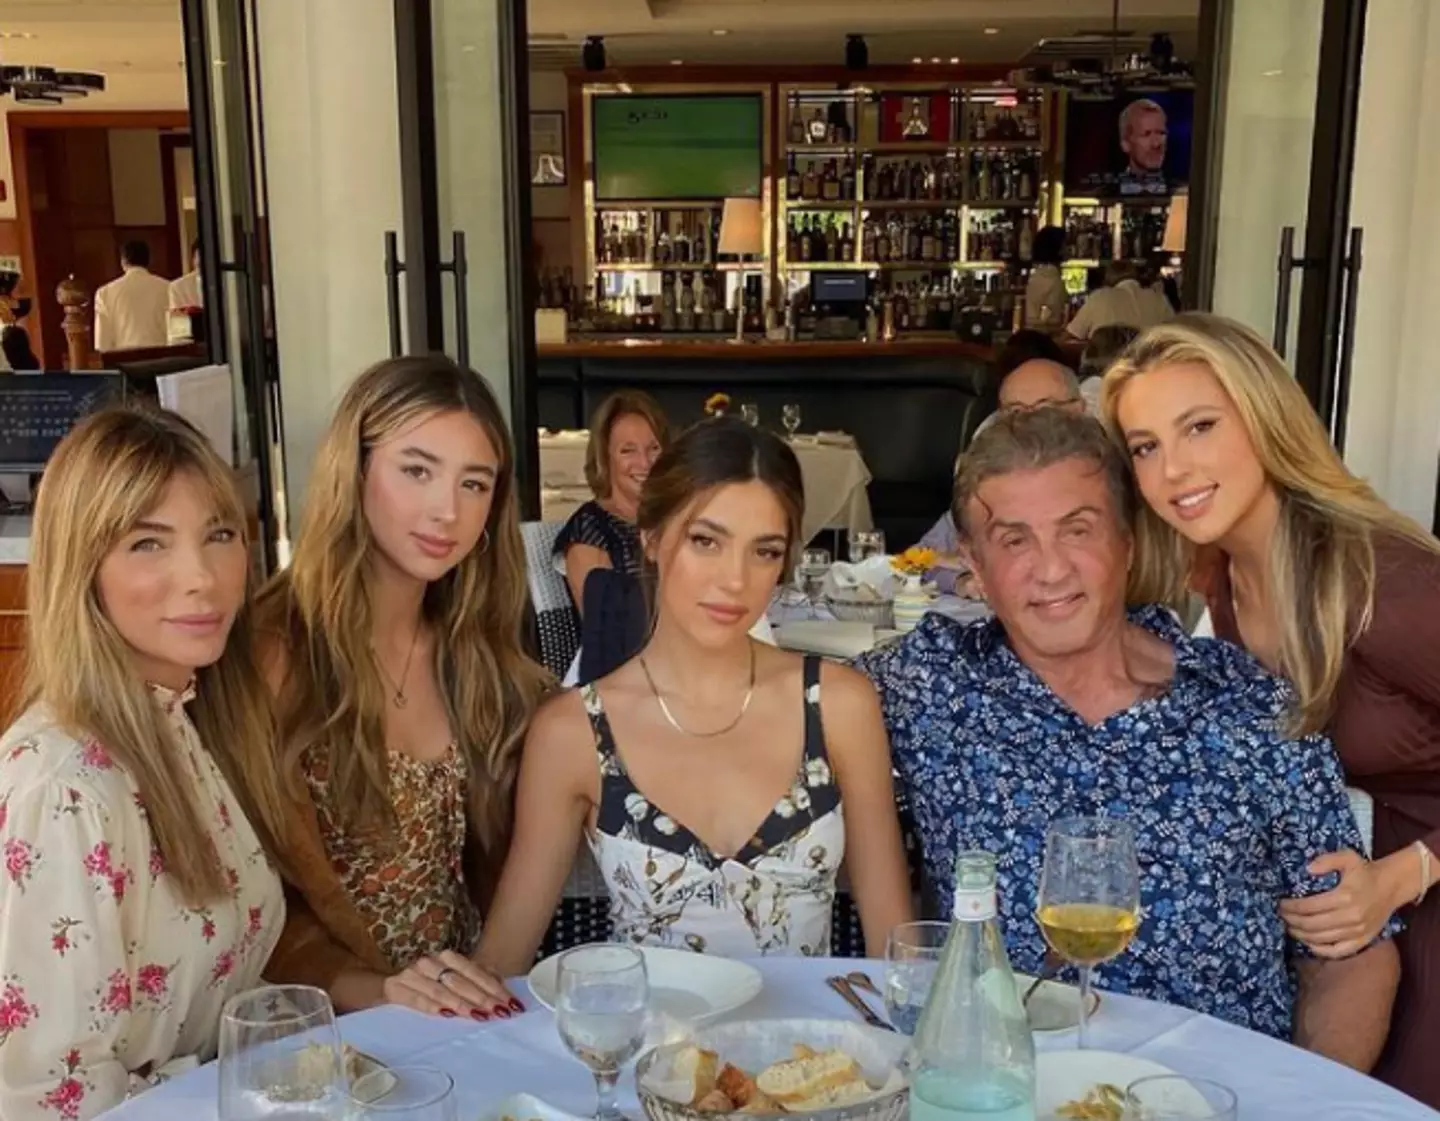 Somehow Stallone's youngest daughter has managed to get away with landing a boyfriend.